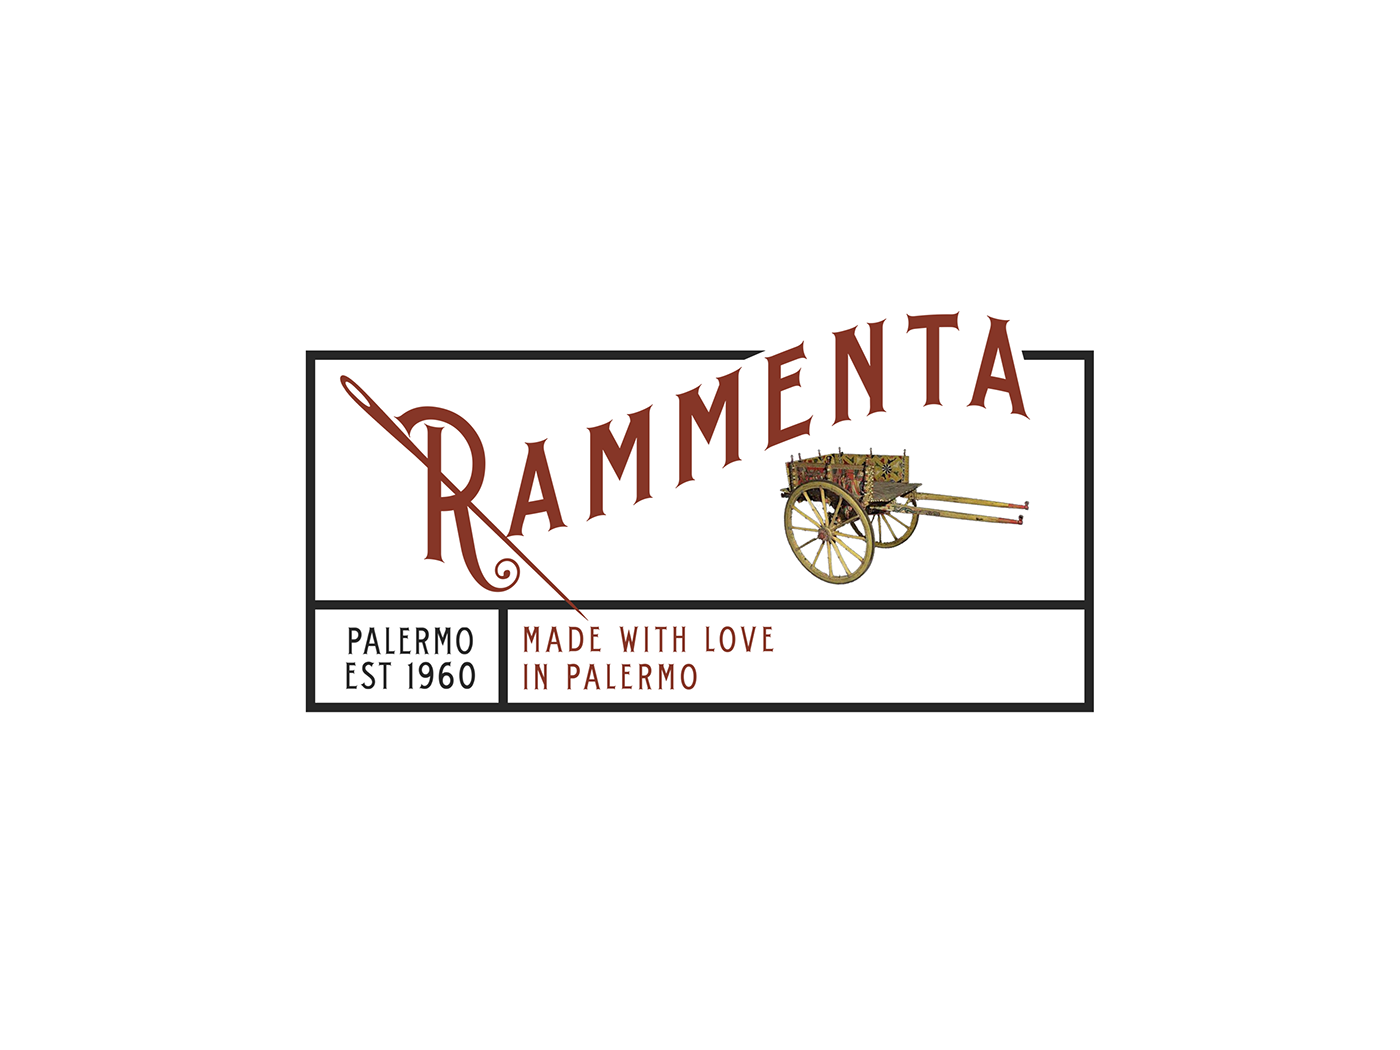 rammenta packaging design product sew company old company Whimsical Brains adriano clemense sicily